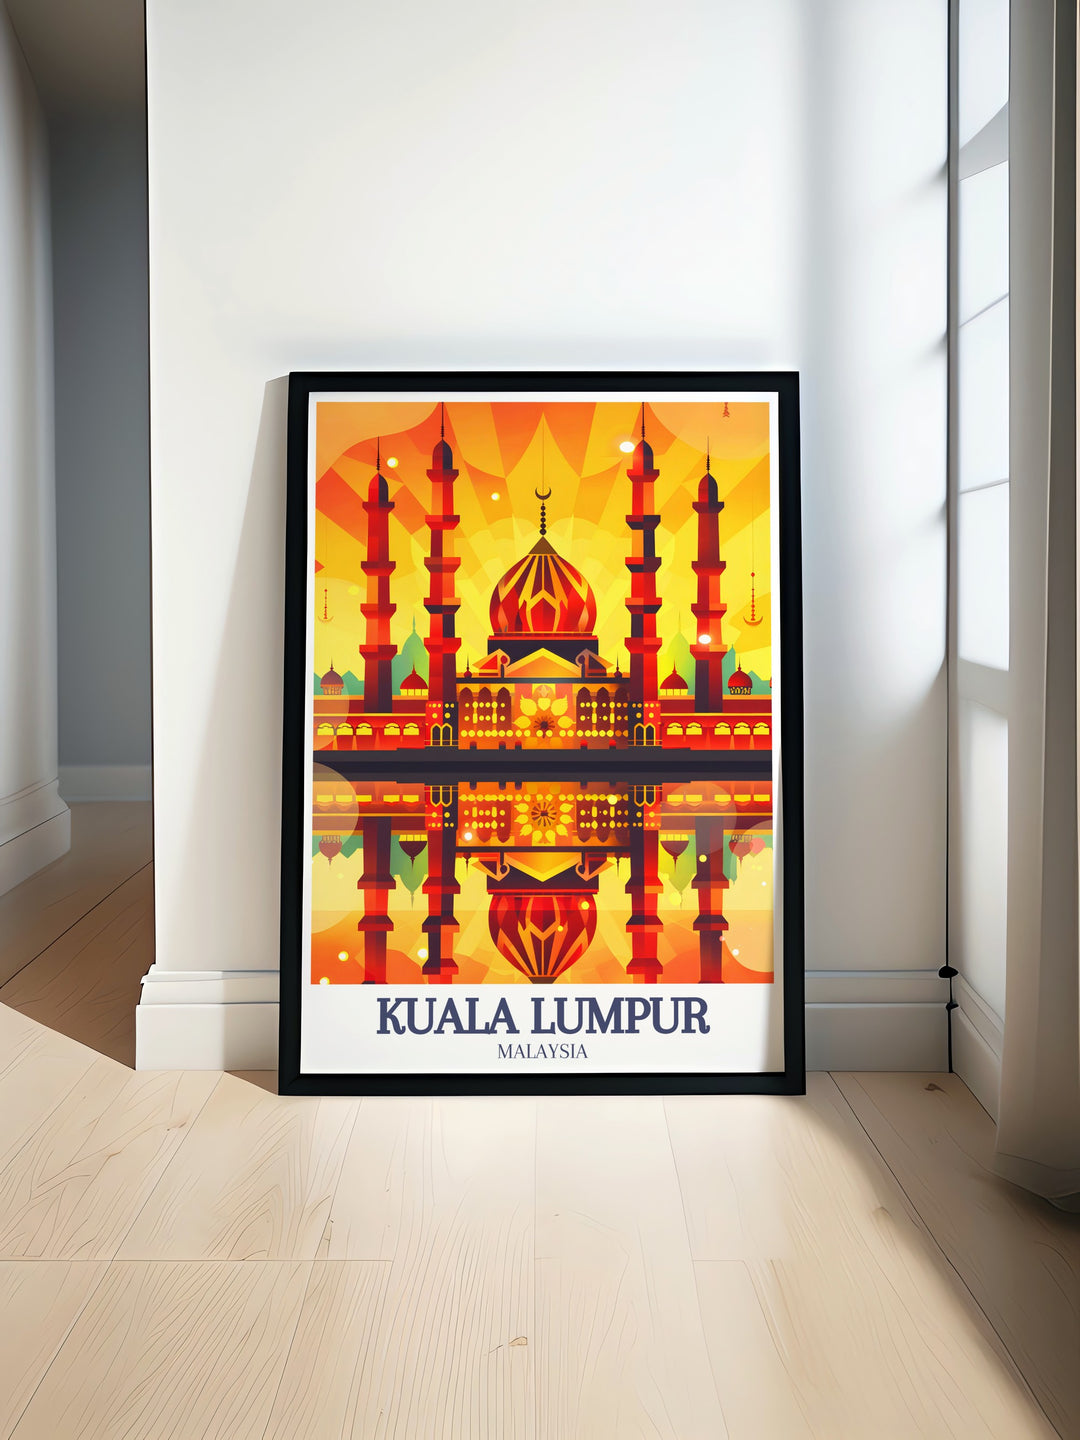 Kuala Lumpur poster featuring the stunning Sultan Salahuddin Abdul Aziz Mosque in Shah Alam. This Malaysia print showcases the mosques intricate architecture and is perfect for adding elegance to any room.